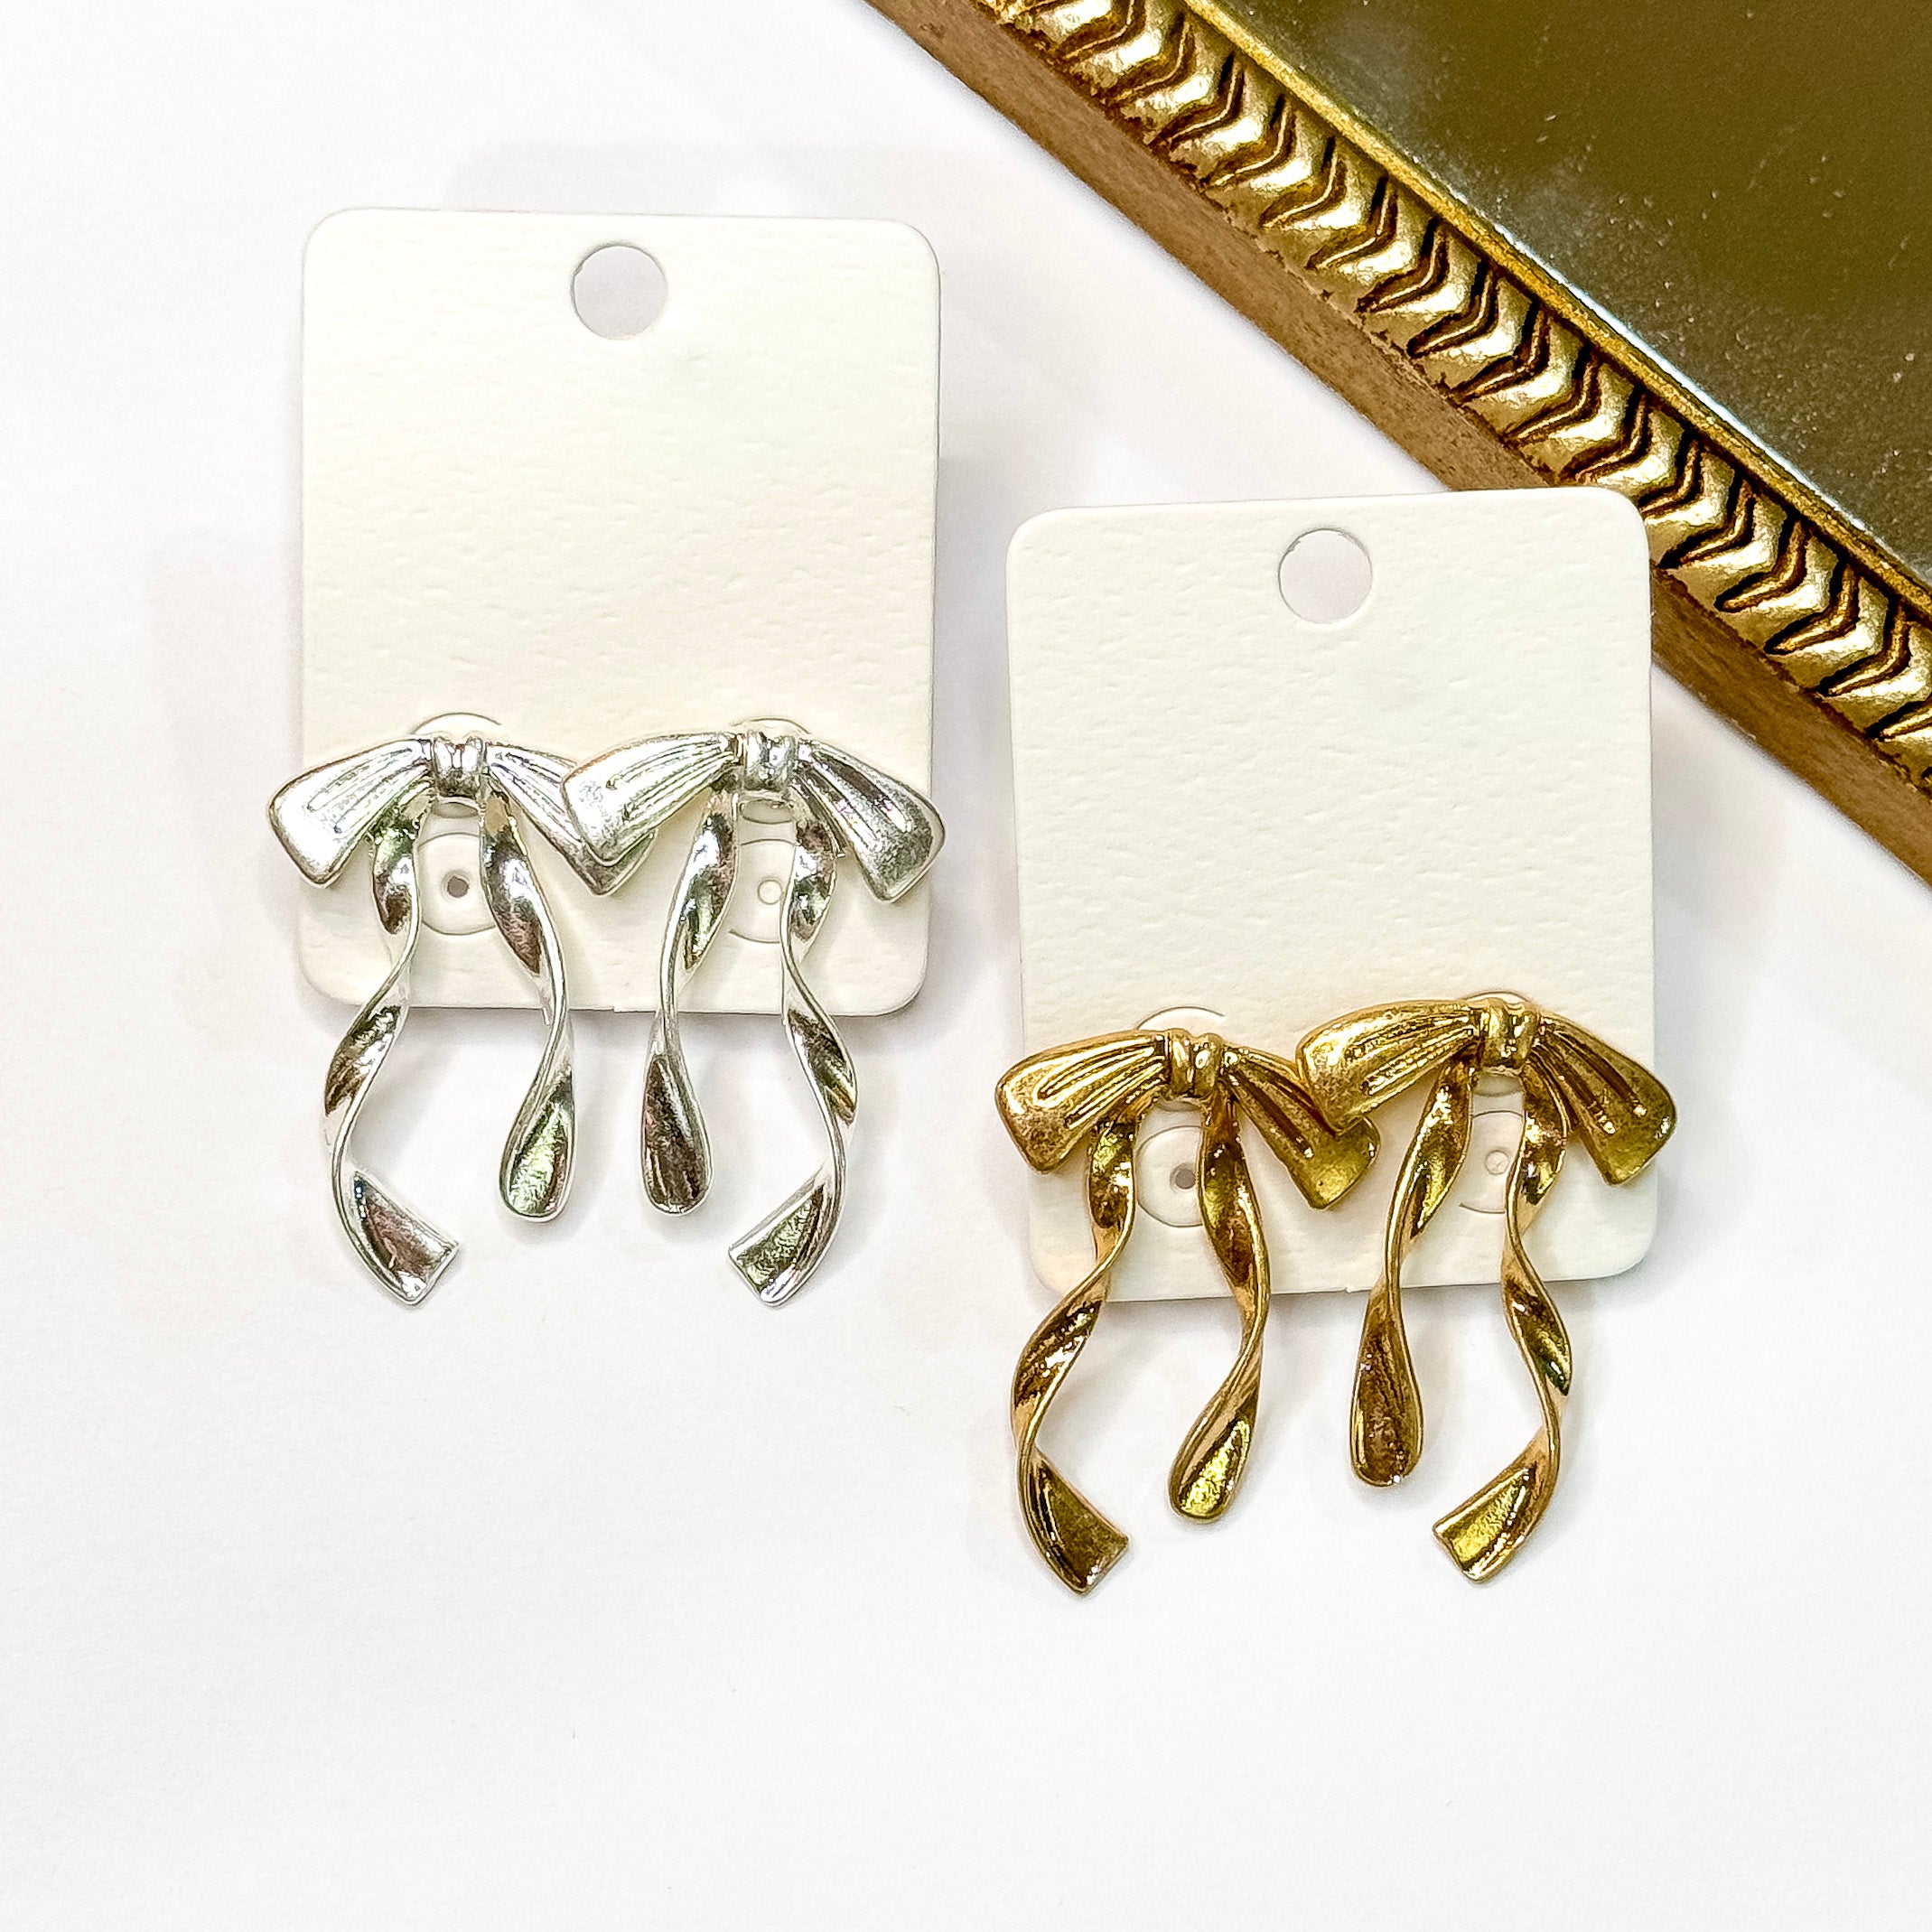 Ribbons and Bows Gold Tone Earrings